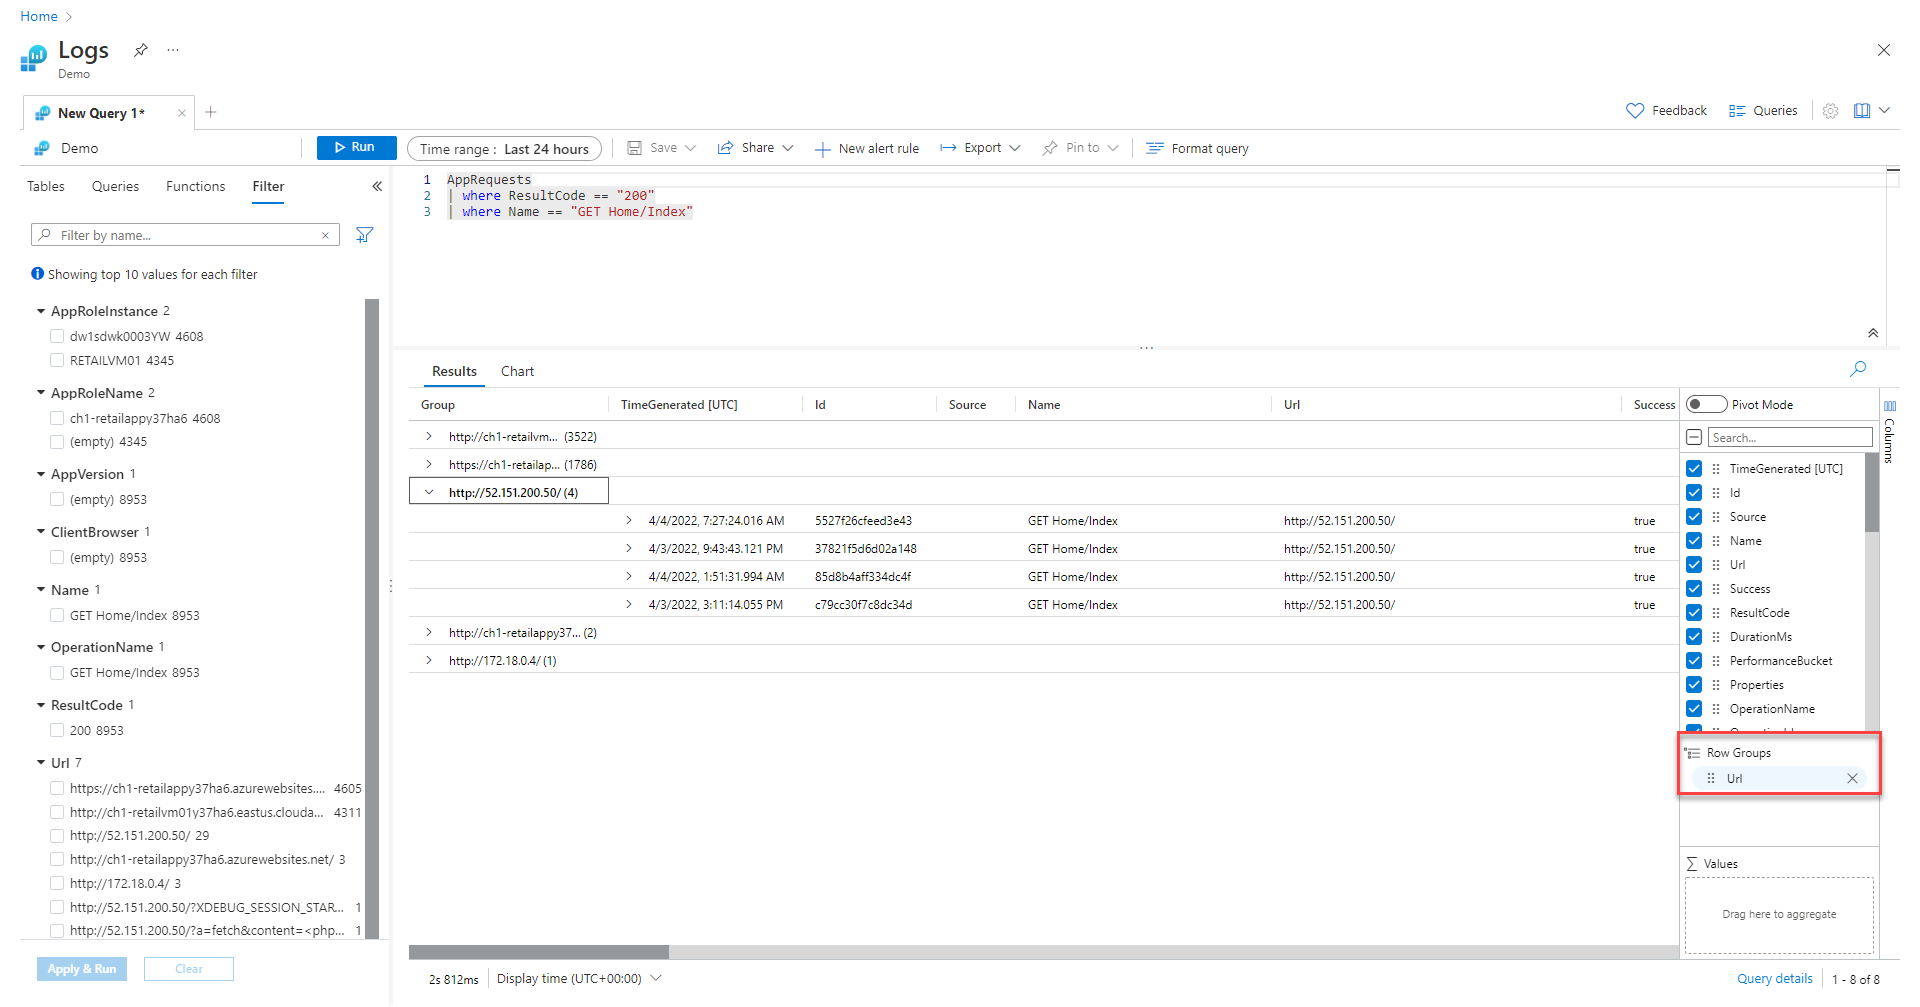 Screenshot that shows query results grouped by URL.